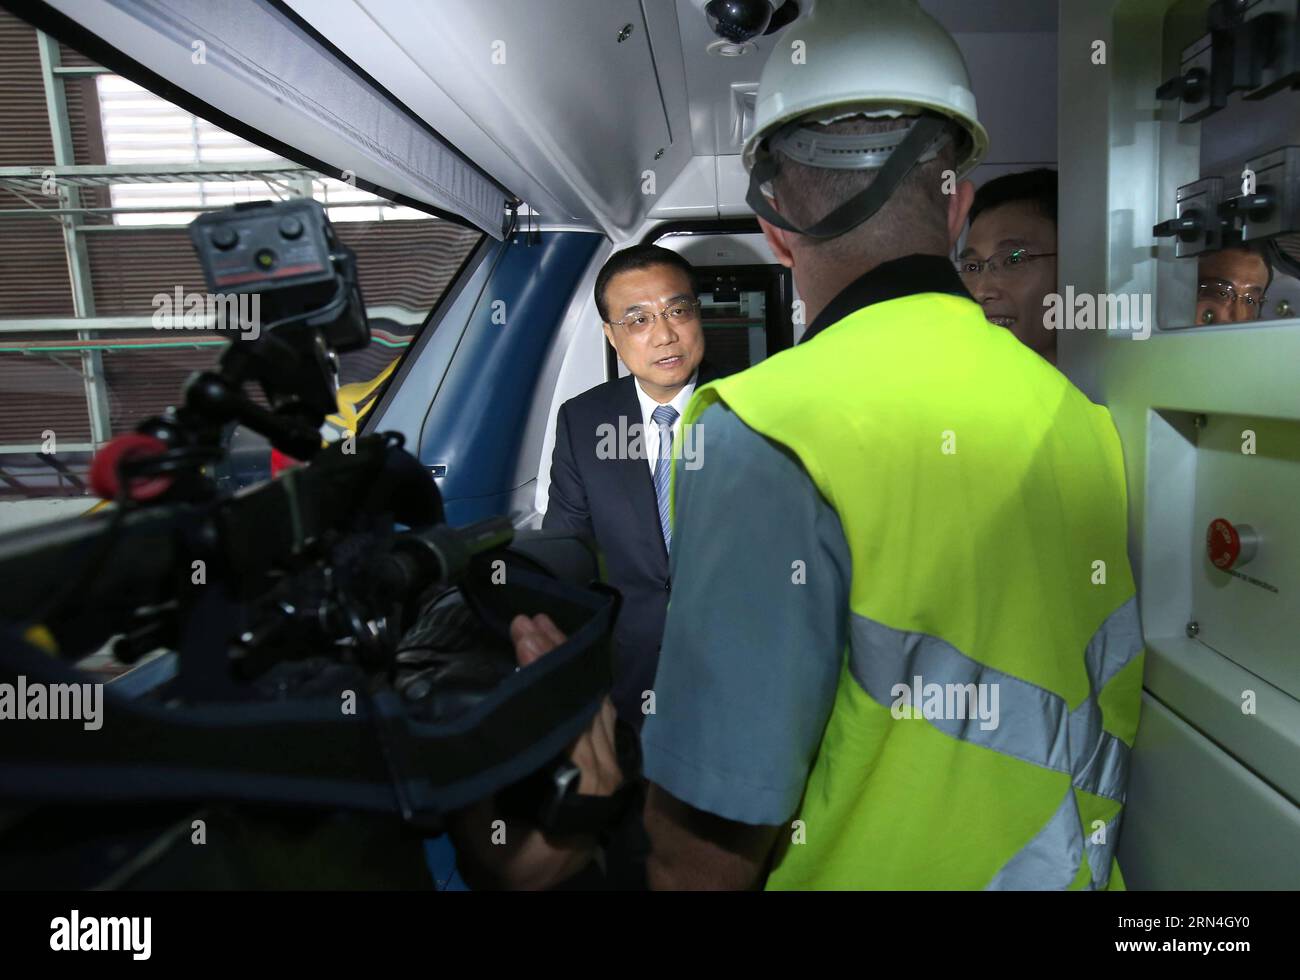 (150520) -- RIO DE JANEIRO, May 20, 2015 -- Chinese Premier Li Keqiang (L) talks to the driver as he takes a ride on a Chinese-made subway train for the Olympic special line in Rio De Janeiro, Brazil, May 20, 2015. ) (wyo) BRAZIL-RIO DE JANEIRO-CHINESE PREMIER-VISIT PangxXinglei PUBLICATIONxNOTxINxCHN   150520 Rio de Janeiro May 20 2015 Chinese Premier left Keqiang l Talks to The Driver As he Takes a Ride ON a Chinese Made Subway Train for The Olympic Special Line in Rio de Janeiro Brazil May 20 2015 wyo Brazil Rio de Janeiro Chinese Premier Visit PangxXinglei PUBLICATIONxNOTxINxCHN Stock Photo